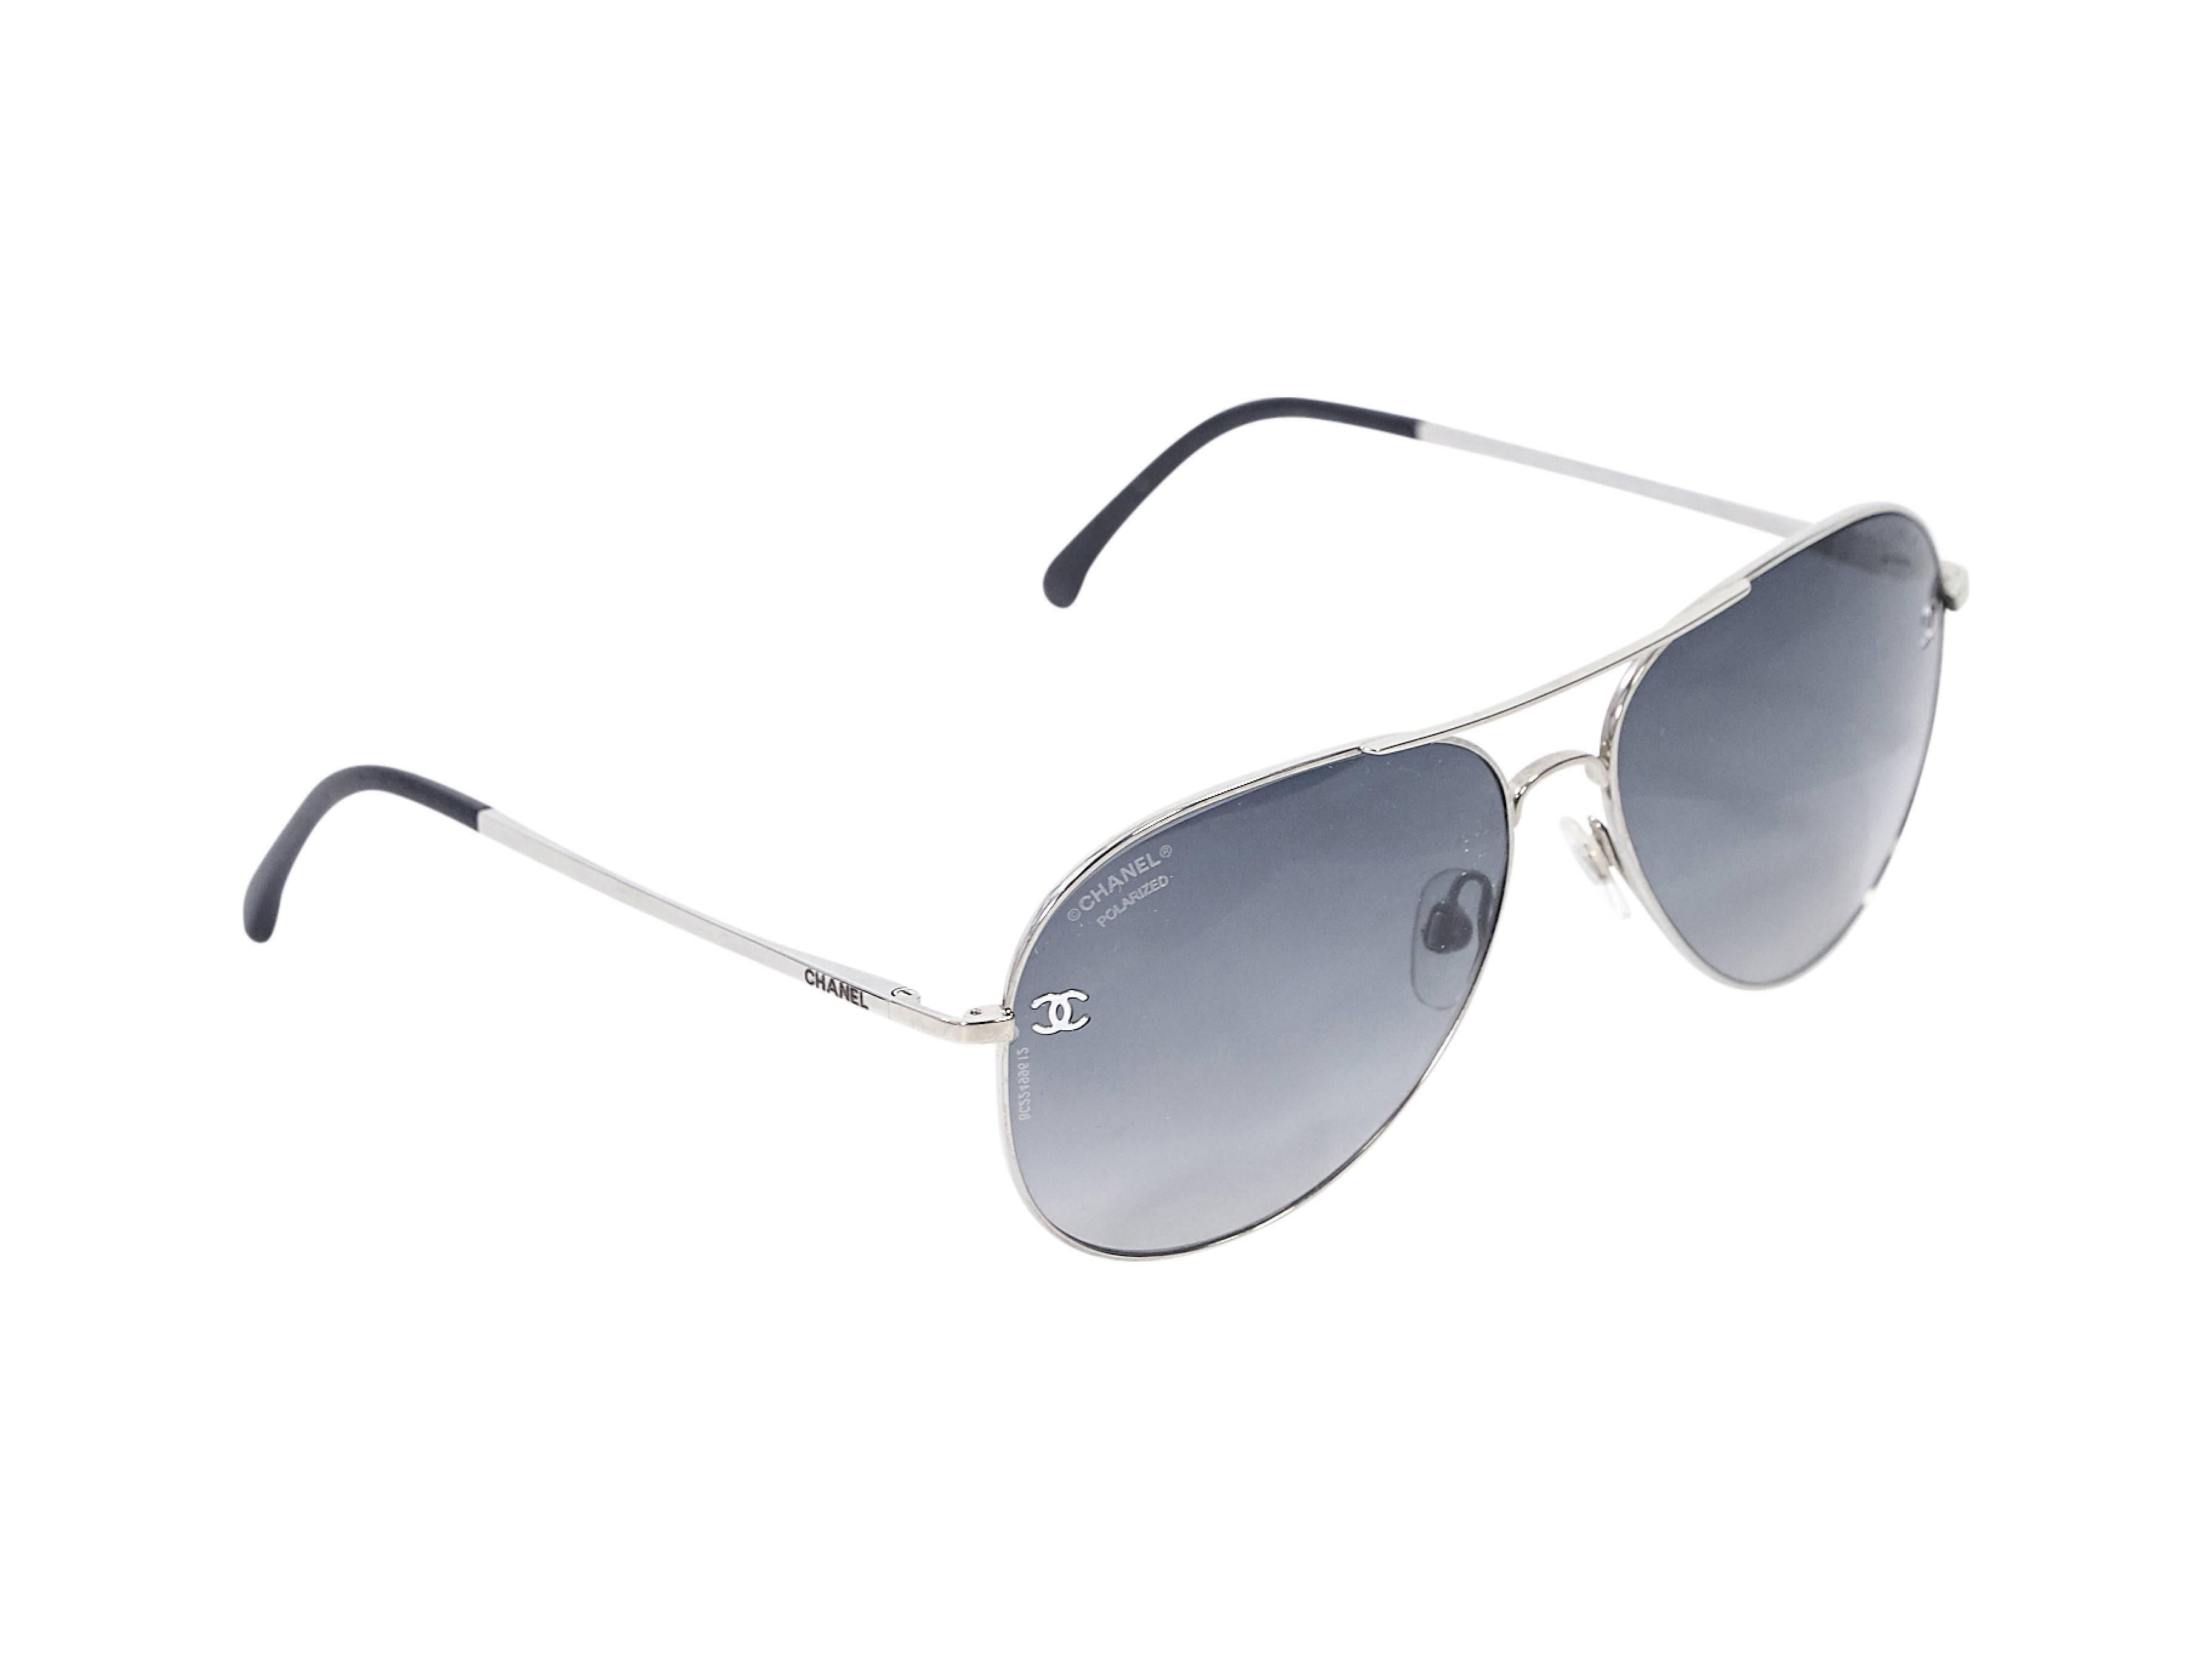 Product details:  Silvertone aviator sunglasses by Chanel.  Polarized, gradient lenses.  Cushioned nose pads.  Thin stems with logo detail at temples. 
Condition: Pre-owned. Very good.

Est. Retail $ 470.00
